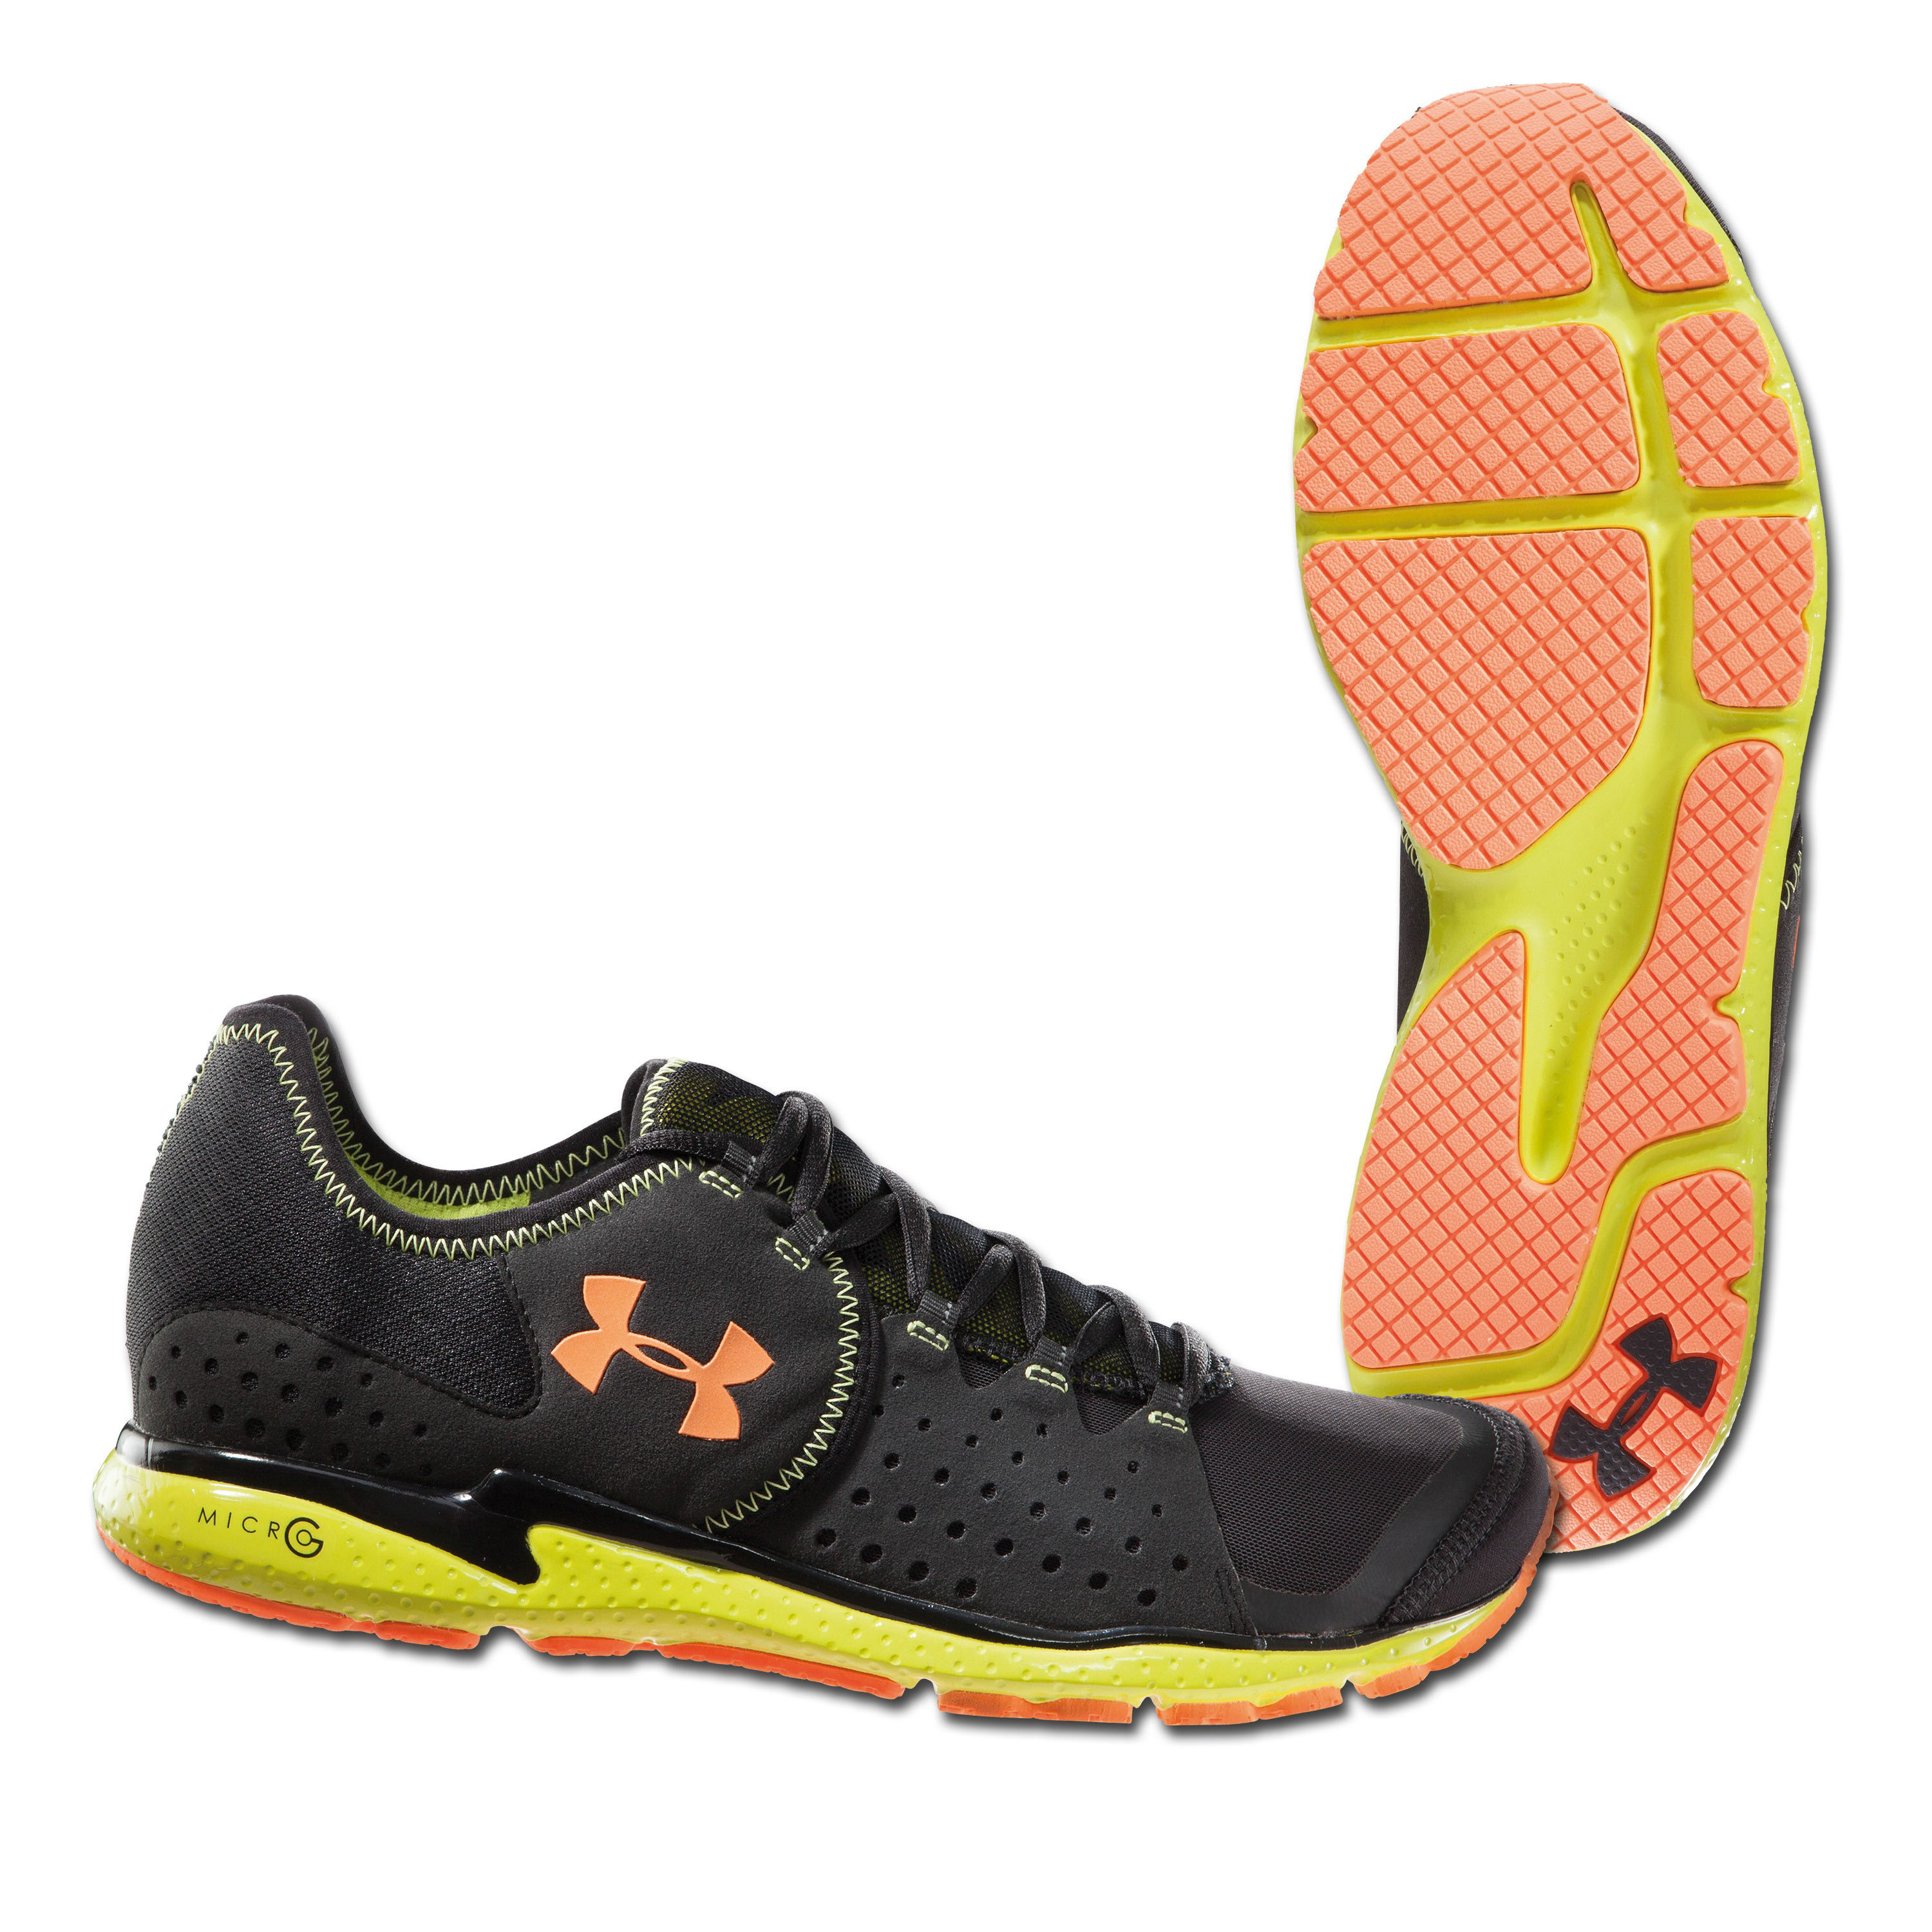 Arne adopteren Duizeligheid Under Armour Running Shoe Micro G® Mantis black/yellow | Under Armour  Running Shoe Micro G® Mantis black/yellow | Other Shoes | Shoes | Footwear  | Clothing